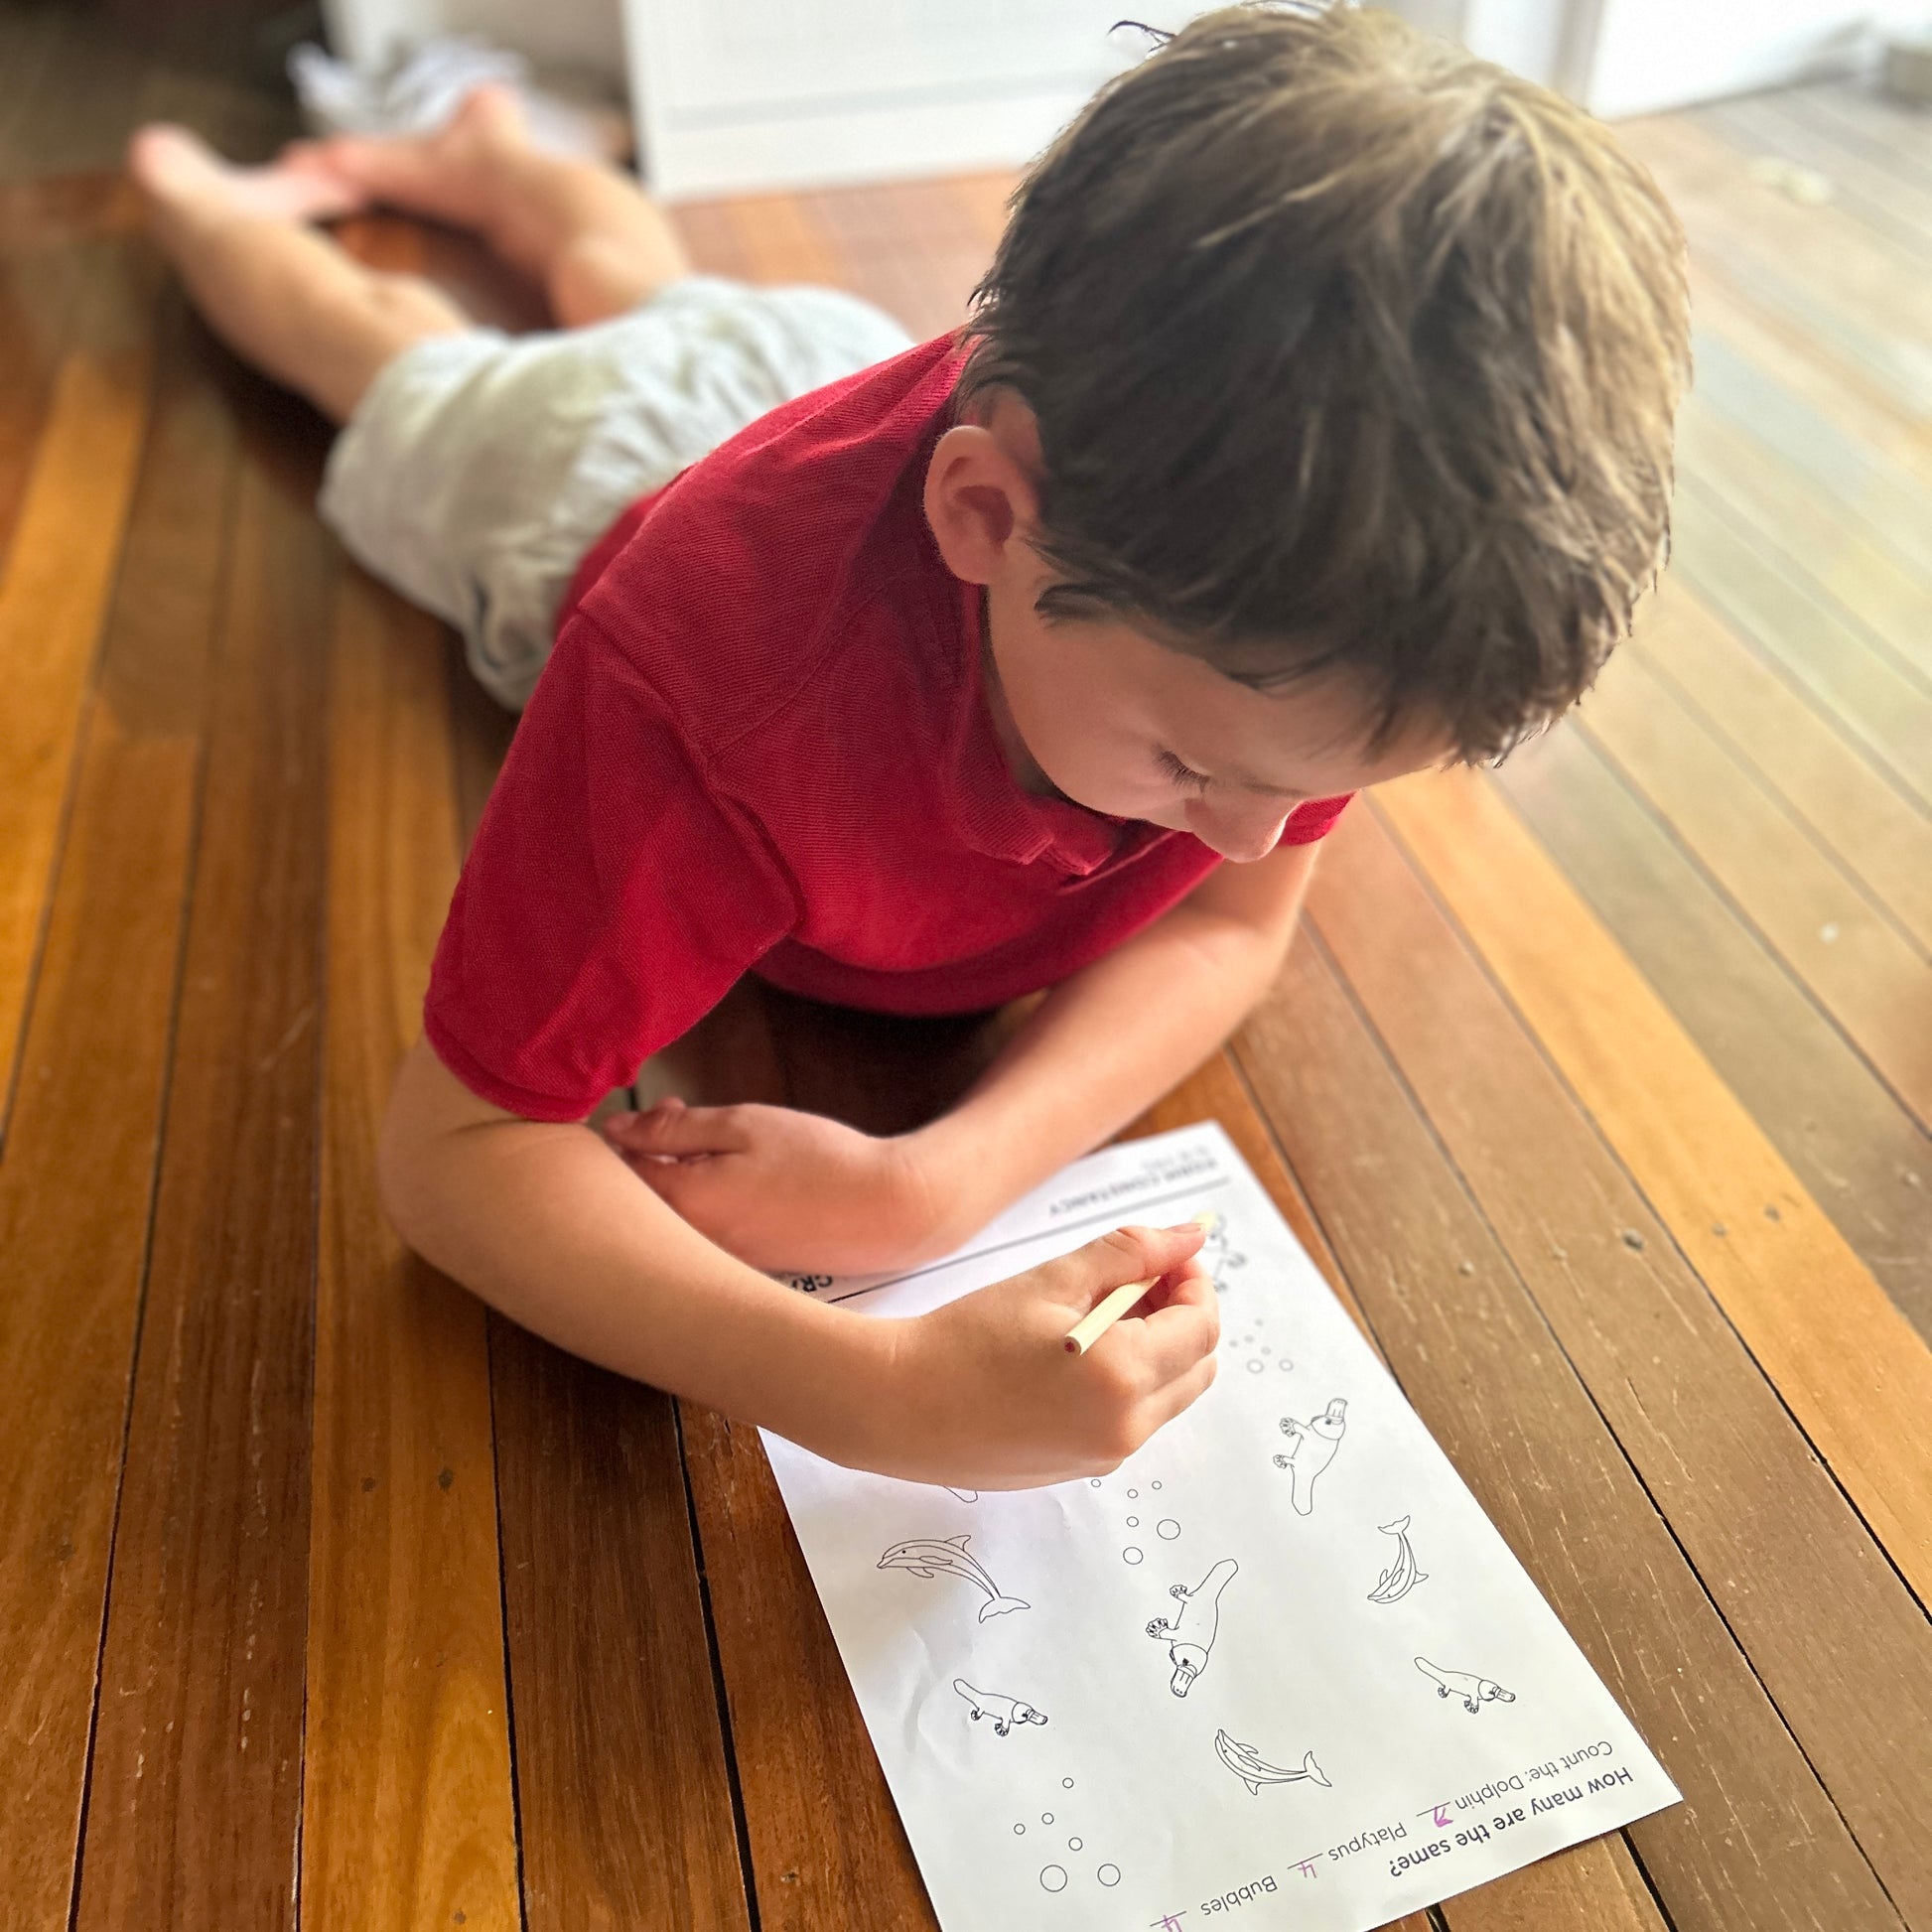 Young boy in red shirt lying on floor with pencil and worksheet